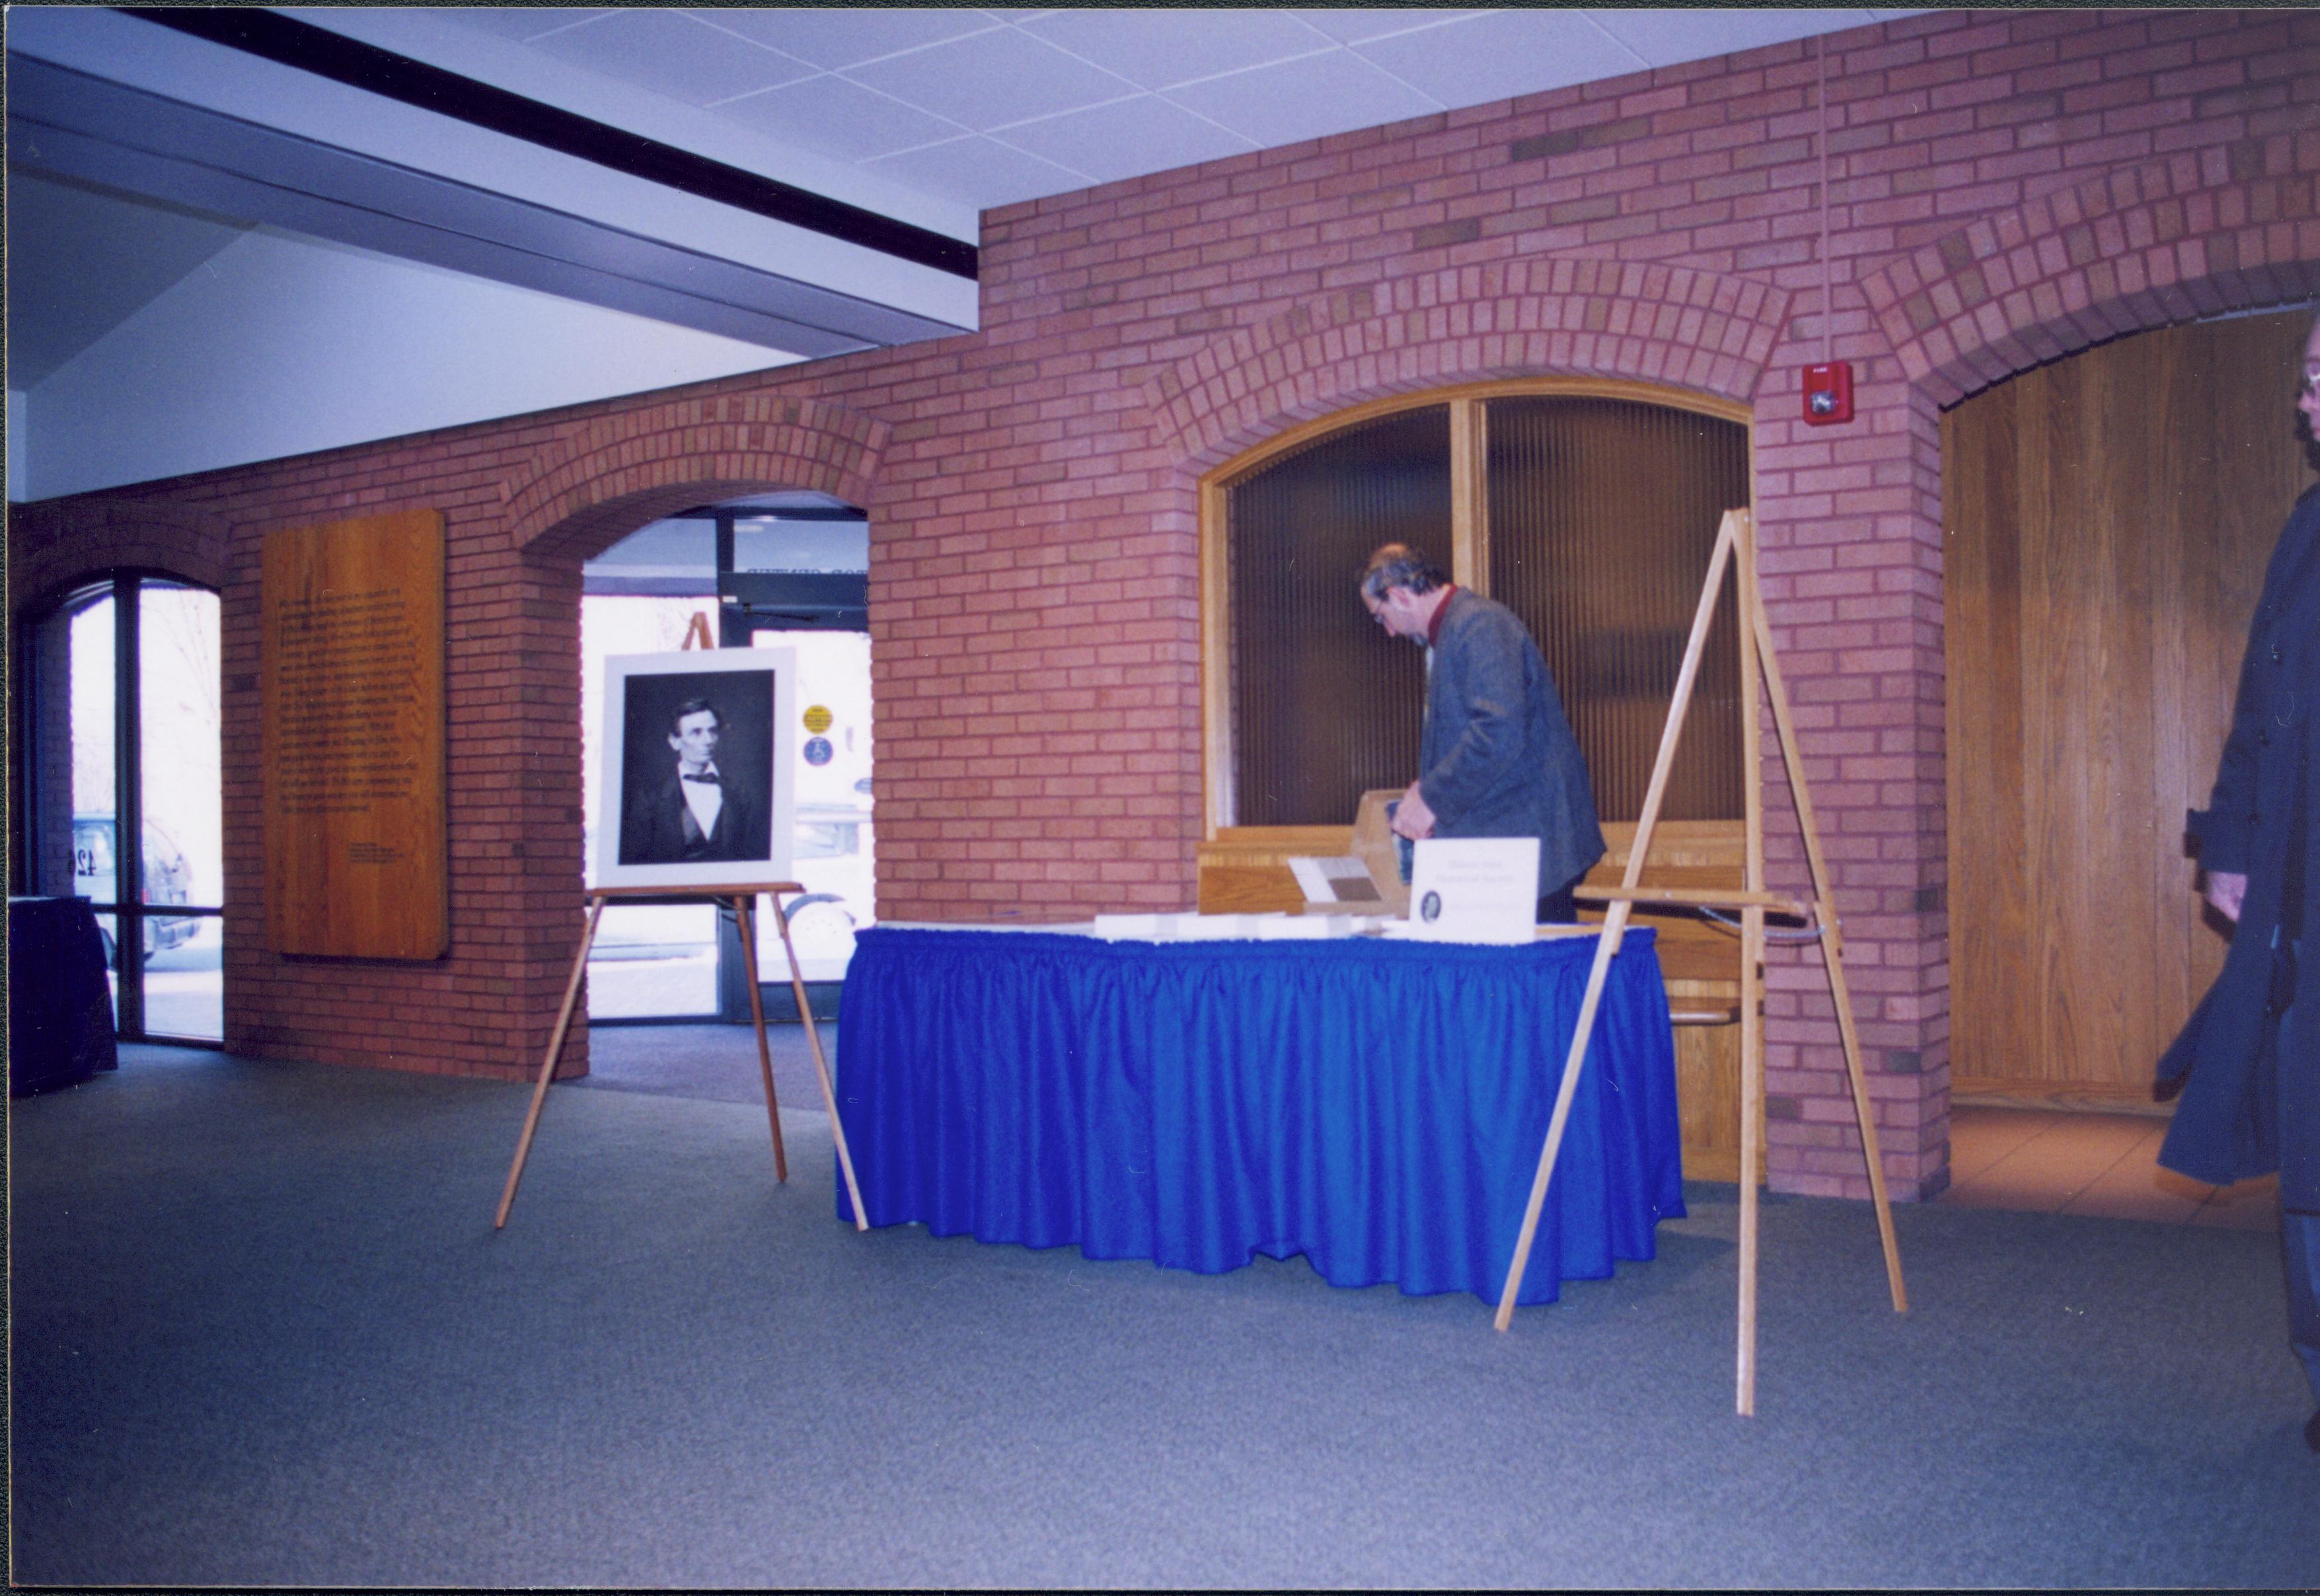 Lincoln's Birthday - Illinois State Historical Society Director Bill Furry setting up information table in Visitor Center lobby. A visitor watches from far right. Restroom arch on right, 7th Street entrance on left near Farewell Address exhibit. Looking Northwest from main area Lincoln's birthday, exhibit, Illinois State Historical Society, visitors, Visitor Center